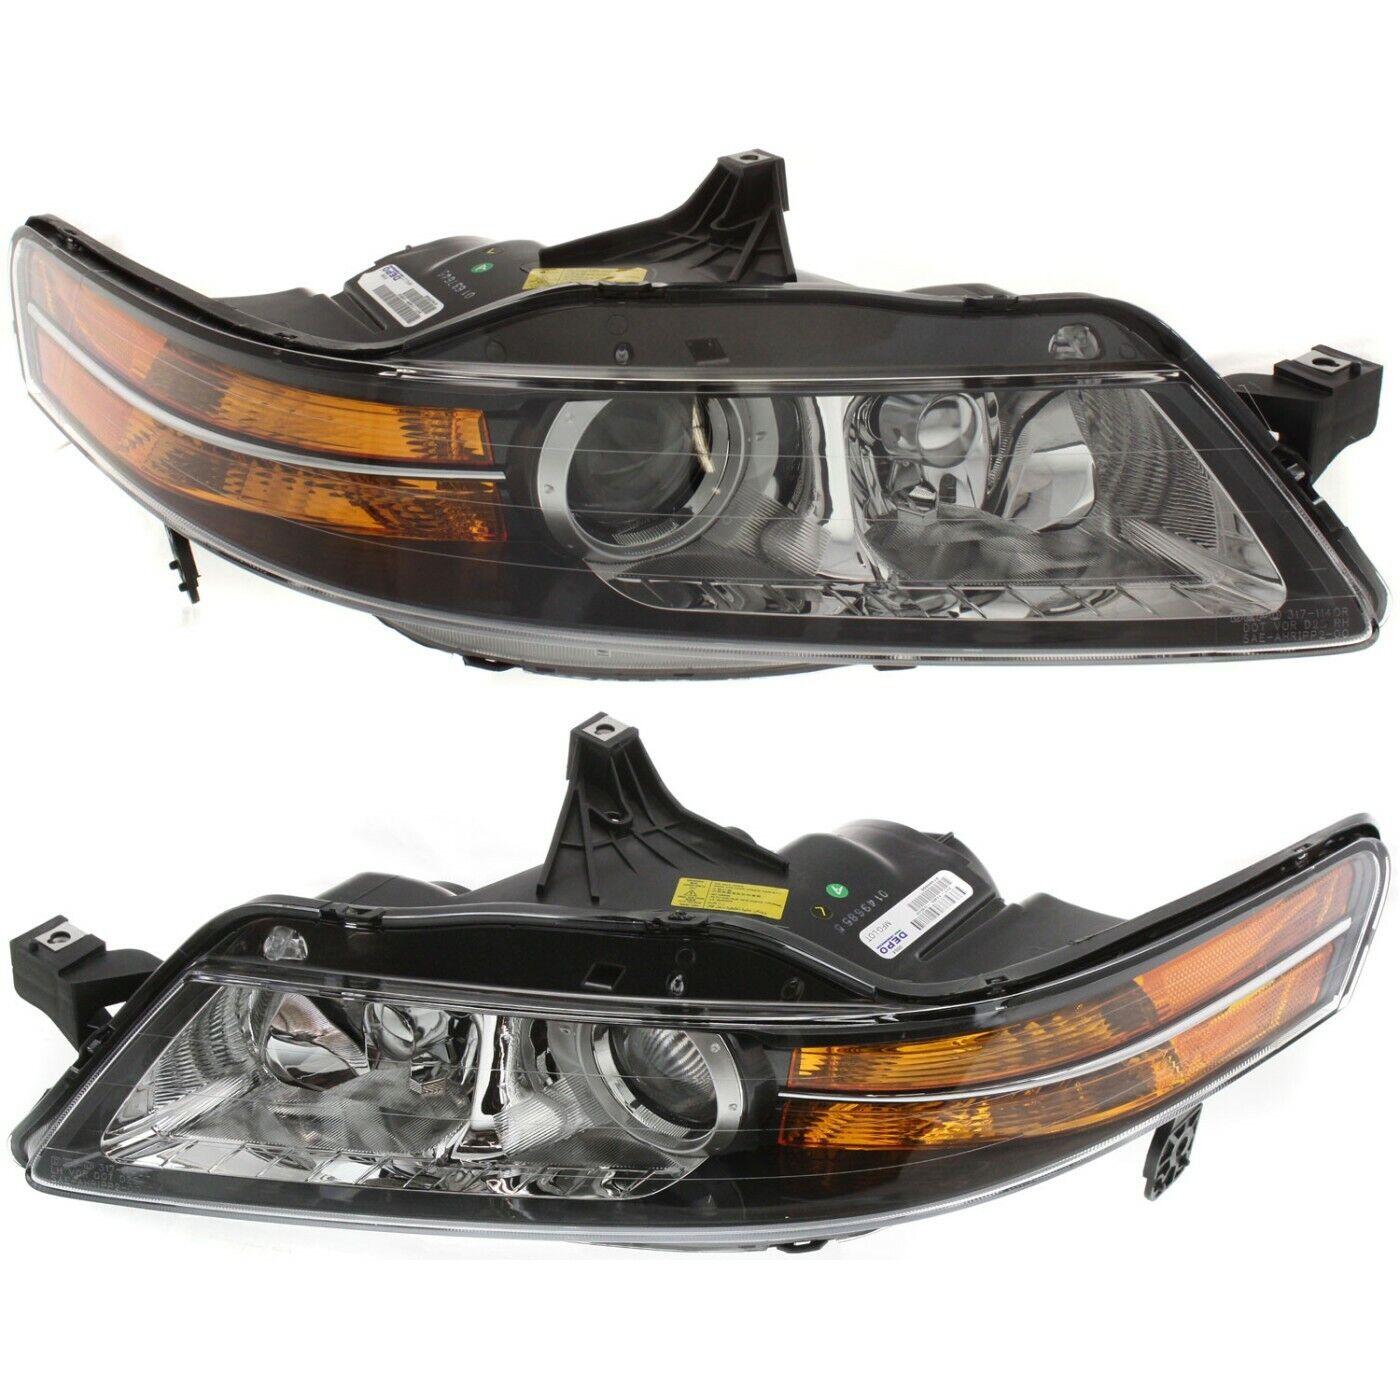 Headlight Set For 2004-2005 Acura TL USA Built Left and Right HID 2Pc